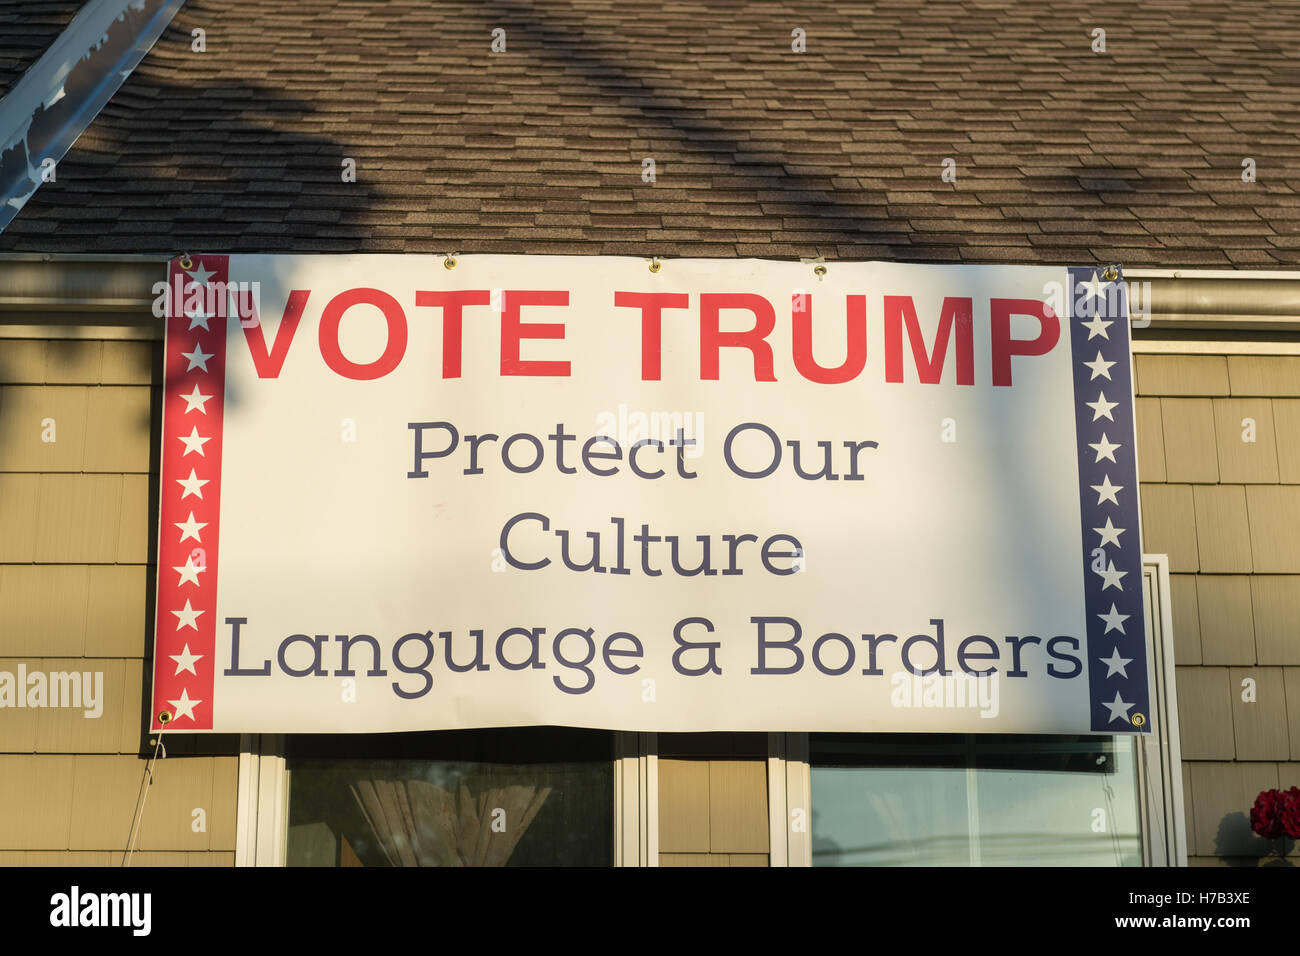 Bellmore, United States. 02nd Nov, 2016. Bellmore, New York, USA. November 2, 2016. Political banner 'VOTE TRUMP Protect Our Culture Language & Borders' supporting the nationalist Republican presidential candidate is near roof of Eileen Fuscaldo, who had a variety of pro-Trump anti-Clinton displays. Credit:  Ann E Parry/Alamy Live News Stock Photo